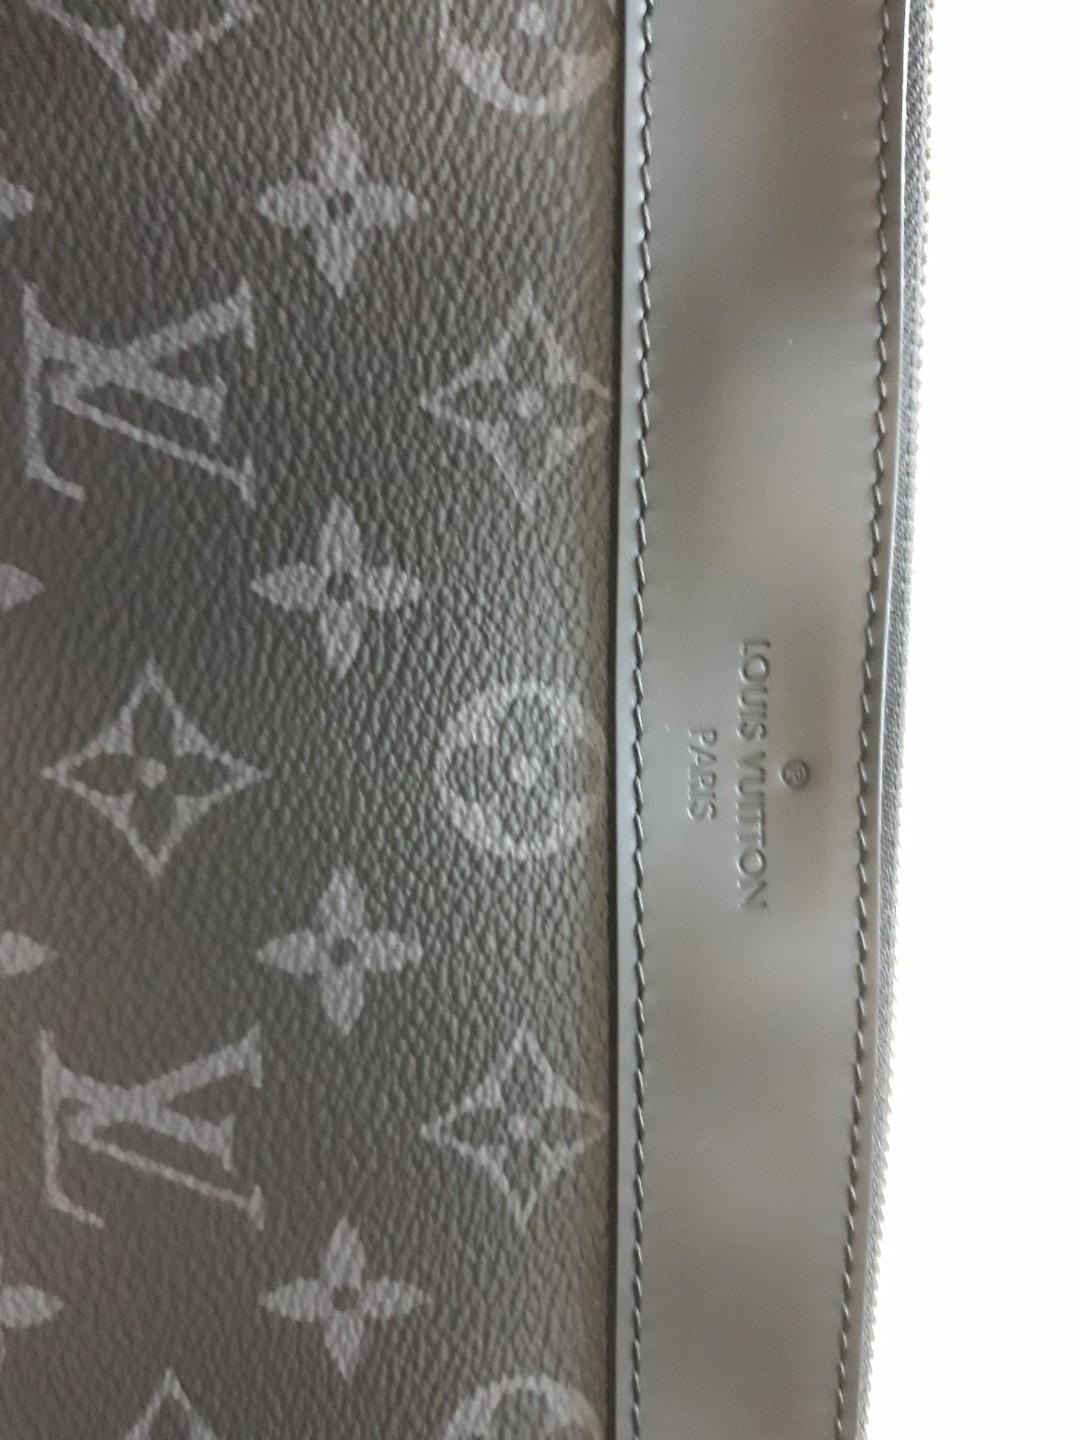 Louis Vuitton, Bags, Louis Vuitton Louis Vuitton Pochette Discovery  Clutch Bag N612 Damier Infin